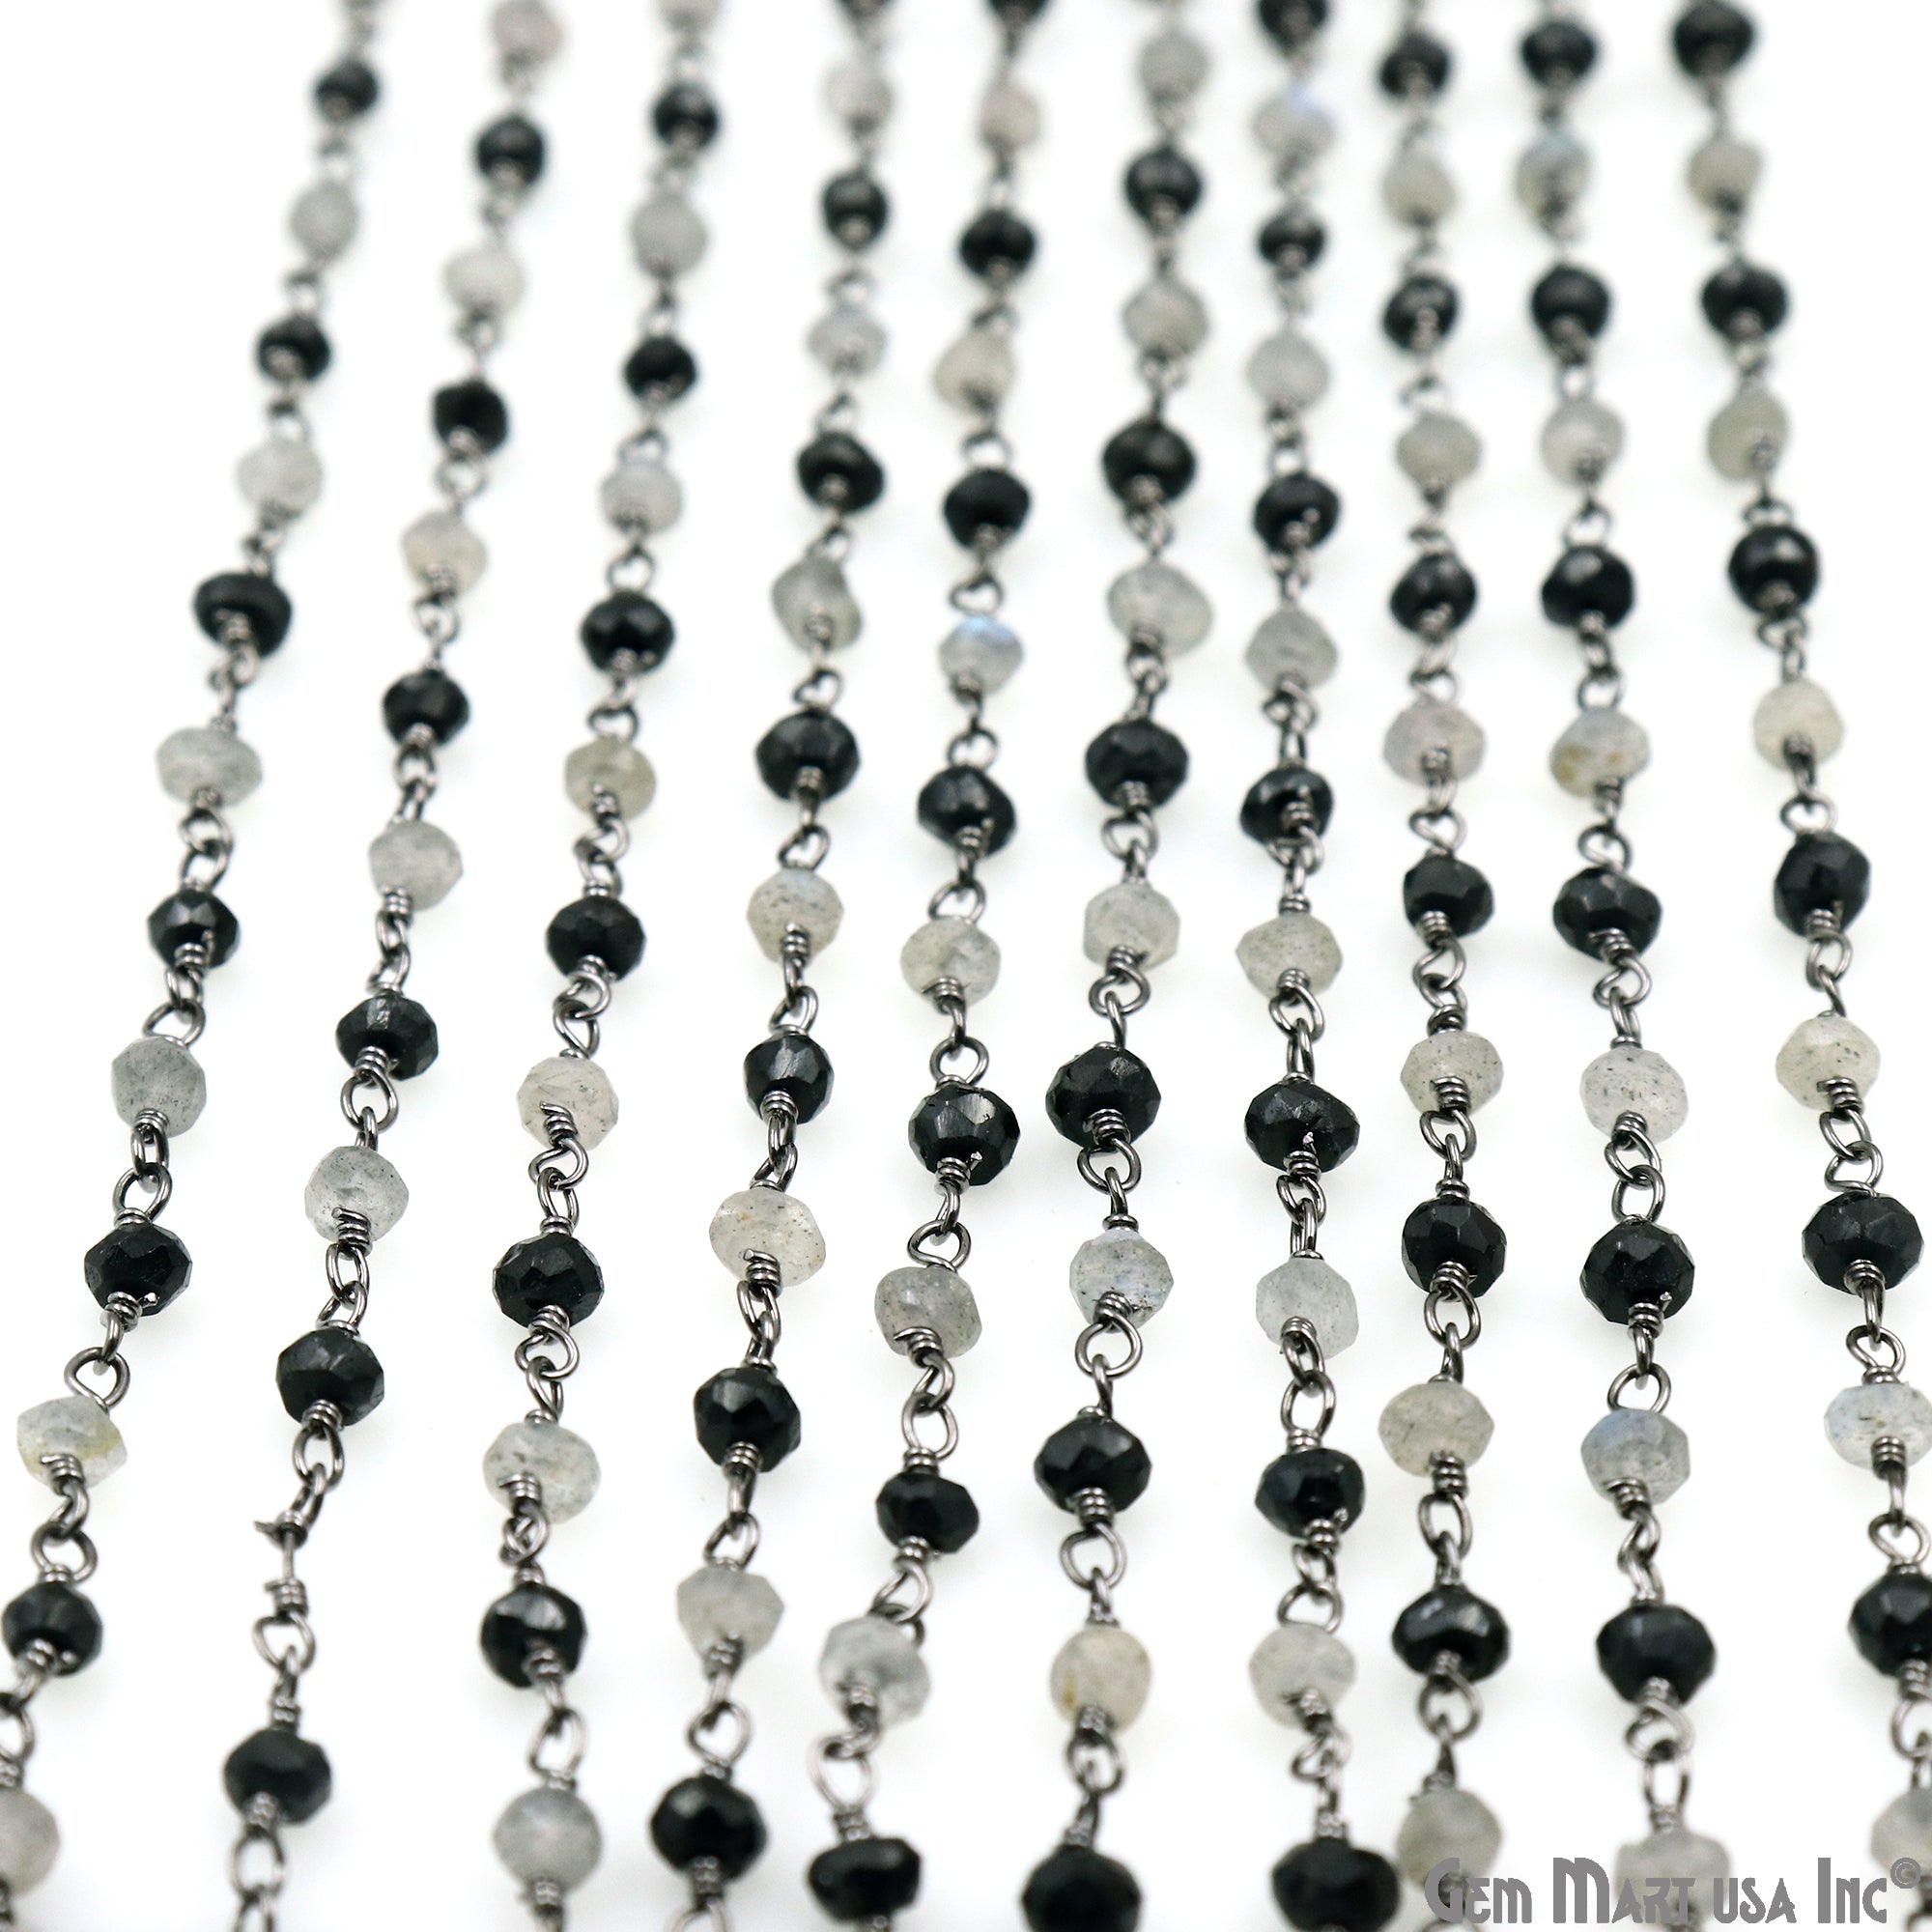 Black Spinel & Labradorite 3-3.5mm Oxidized Faceted Beads Wire Wrapped Rosary Chain